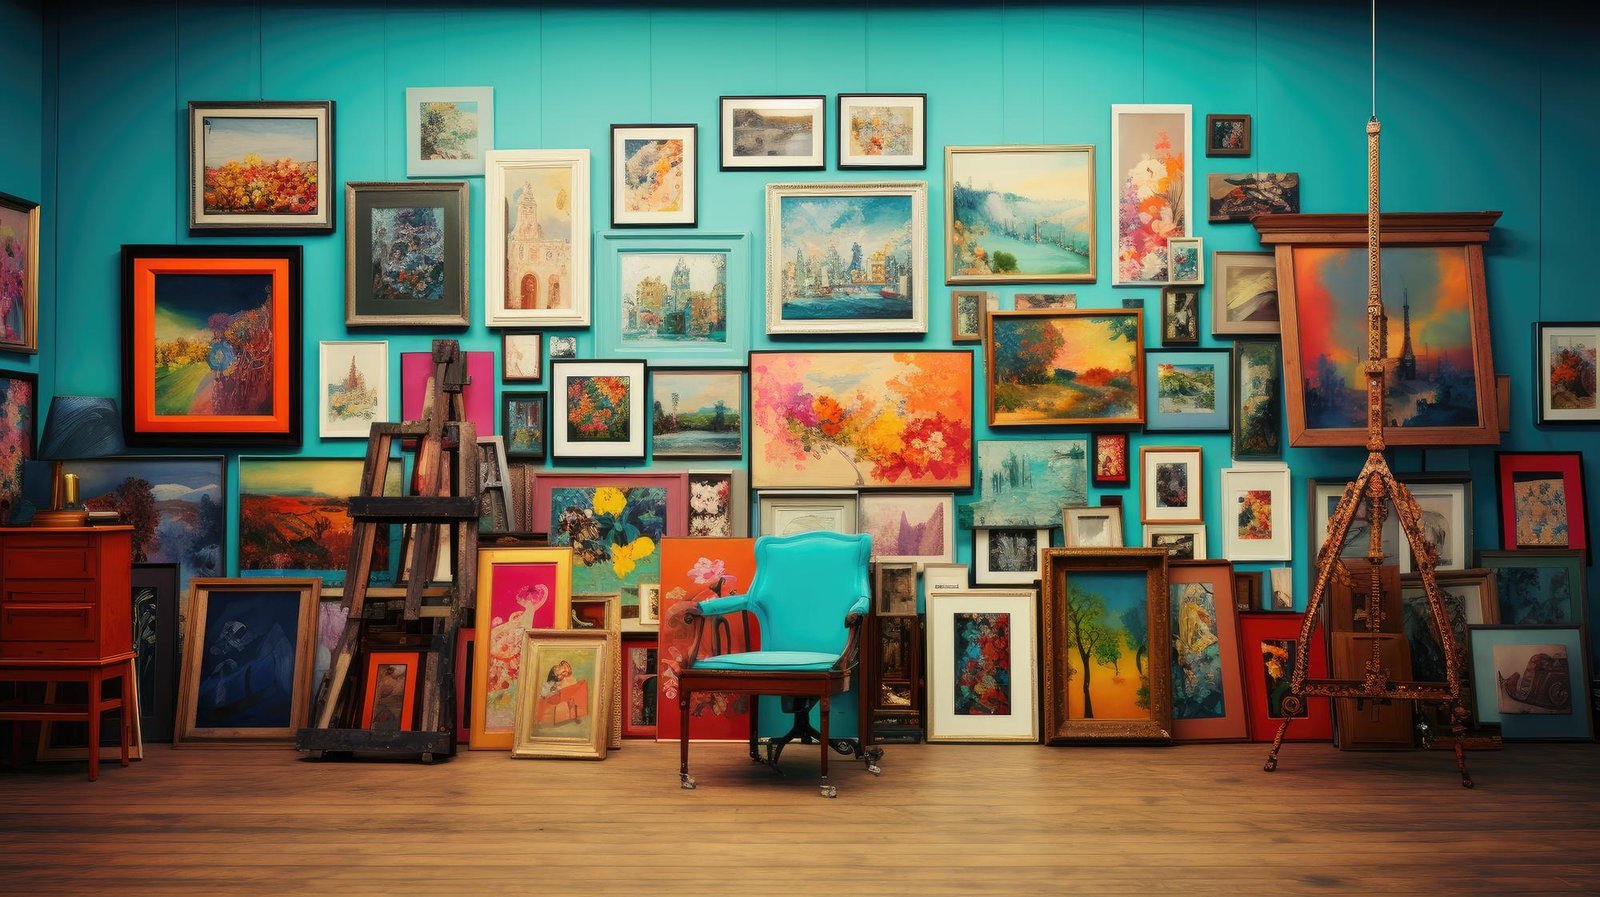 A turquoise wall with lots of wall art and a turquoise chair.